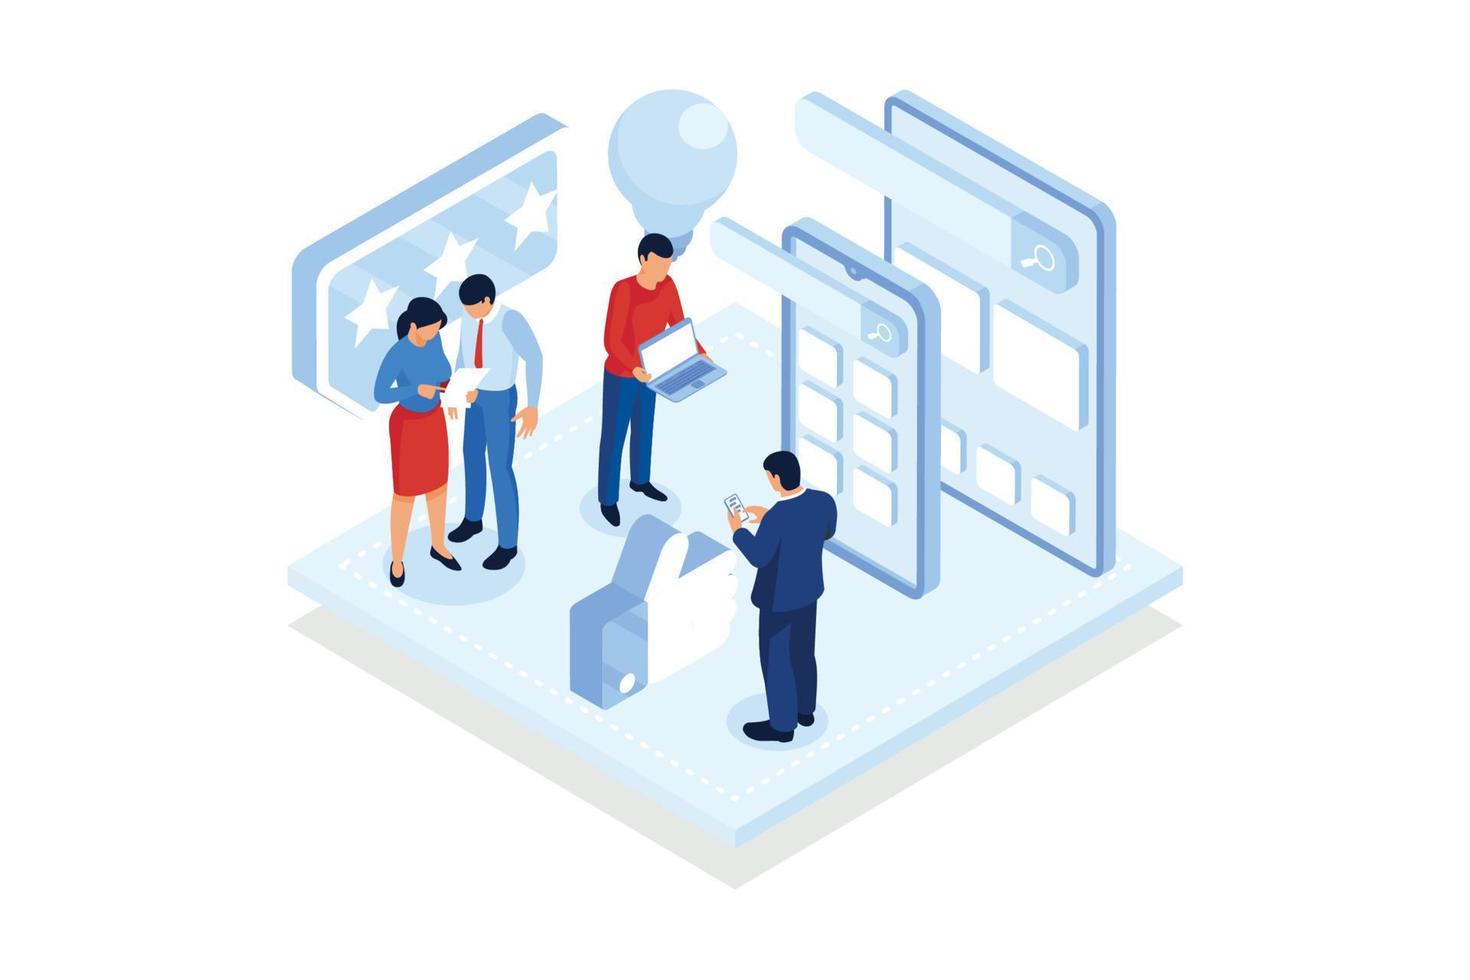 Business idea. Business plan, small business launcher, innovative development, creating new ideas, become a market leader.isometric vector modern illustration